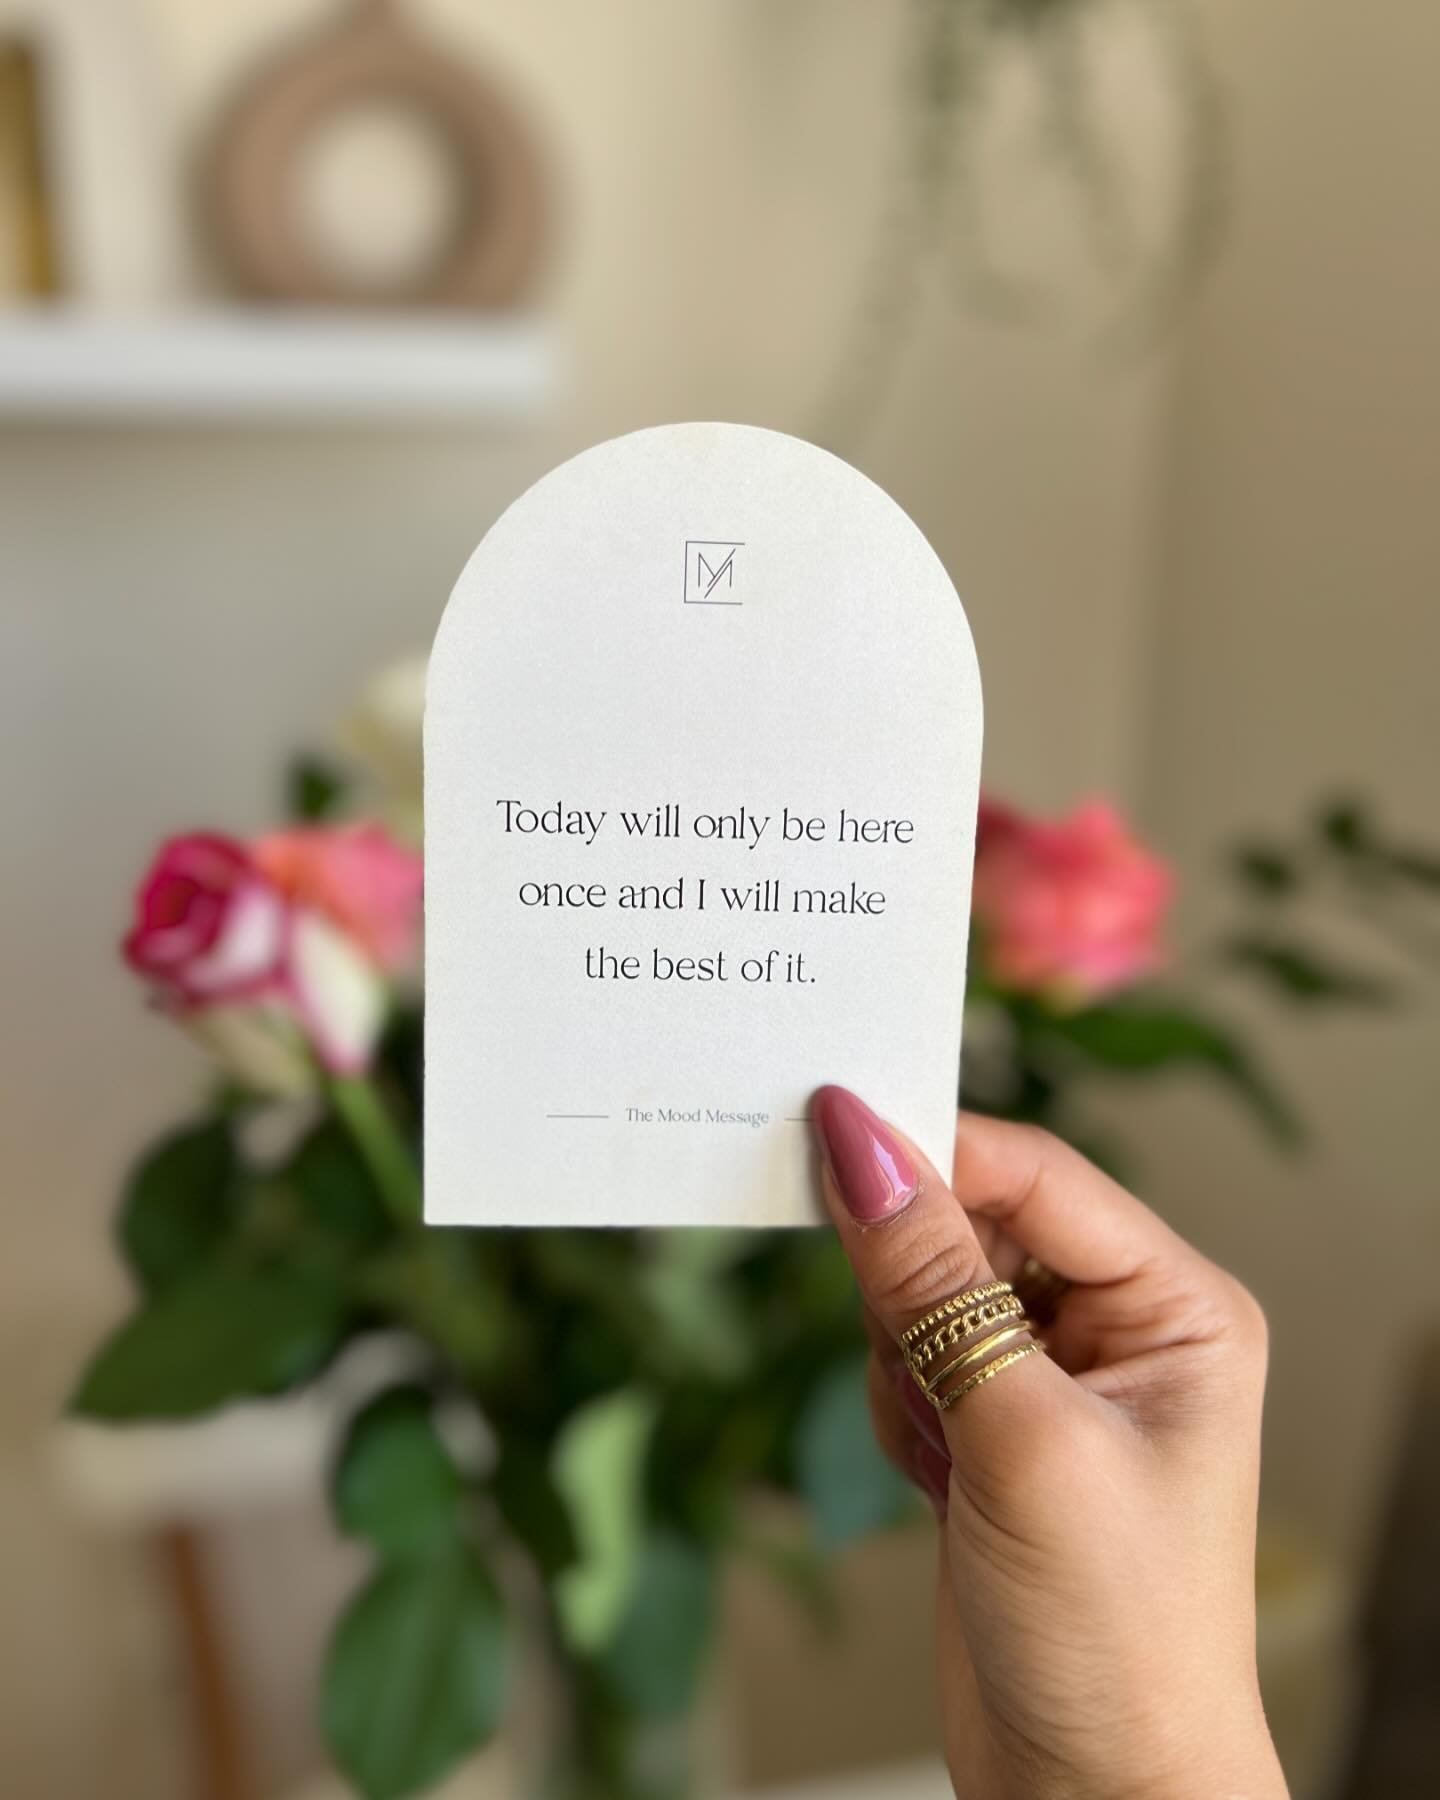 This is your reminder to thank yourself for every step you&rsquo;re taking 🤍✨
Even the smallest actions matter.

#personalbranding #brandingstrategy #brandvisuals #branding tops #flowersday 
#strategiemarque #moodcdesign #algeriandesigner #mindset #